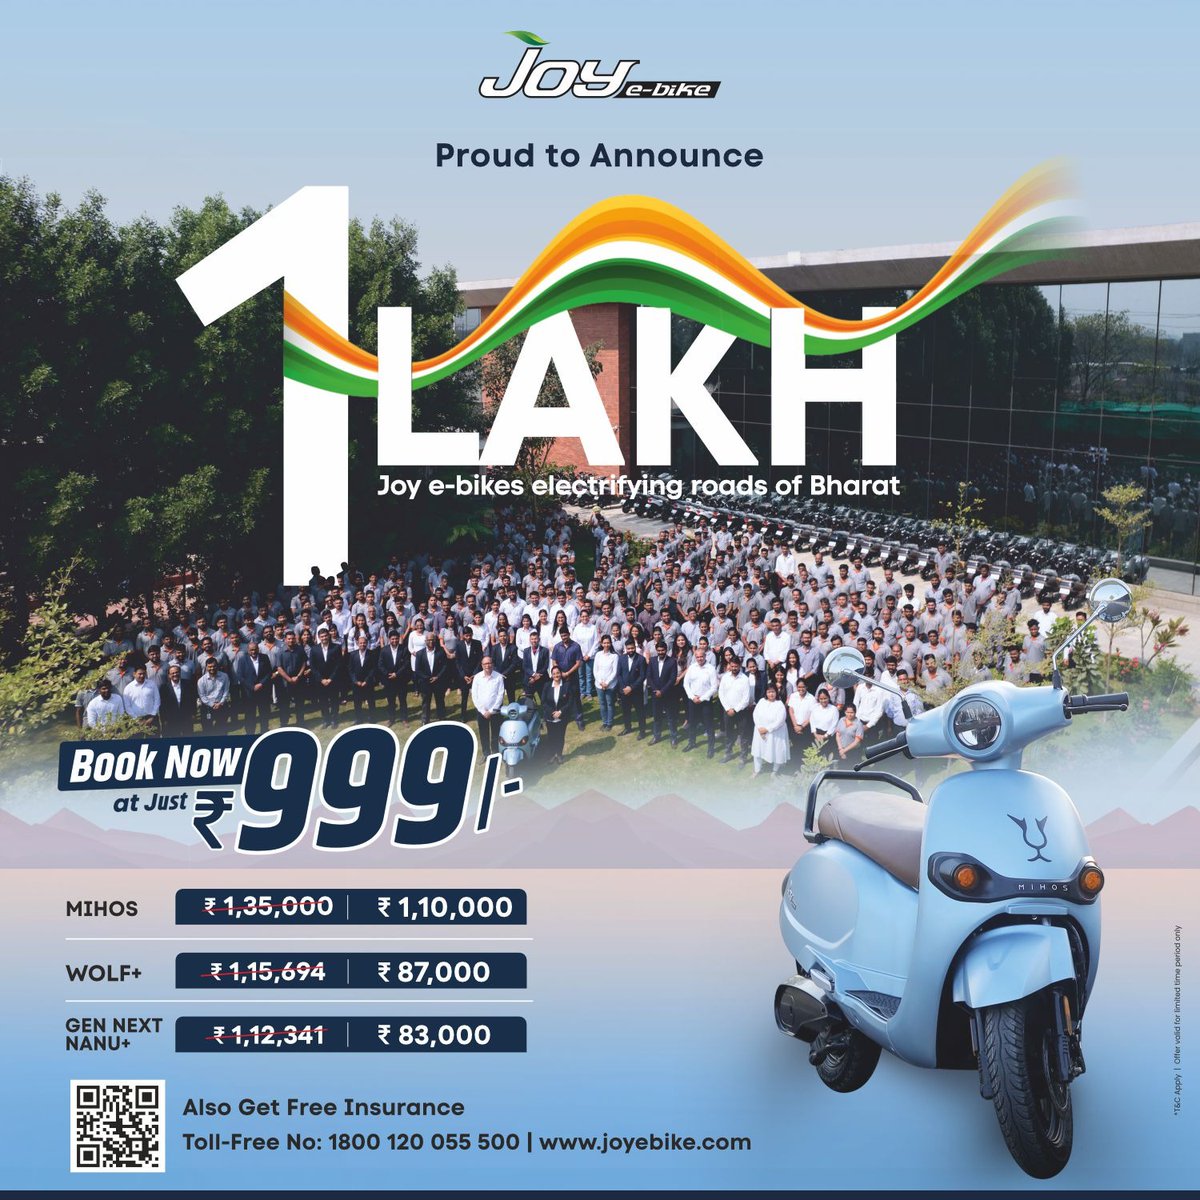 Get Ready to be on your Toes, Because We have hit the 1 lakh Mark on our factory's floor. And to make this occasion more special we have a surprise. Now Book a Joy e-bike at just 999/- and enjoy never seen Before discounts. (Offer valid on booking through the official link)